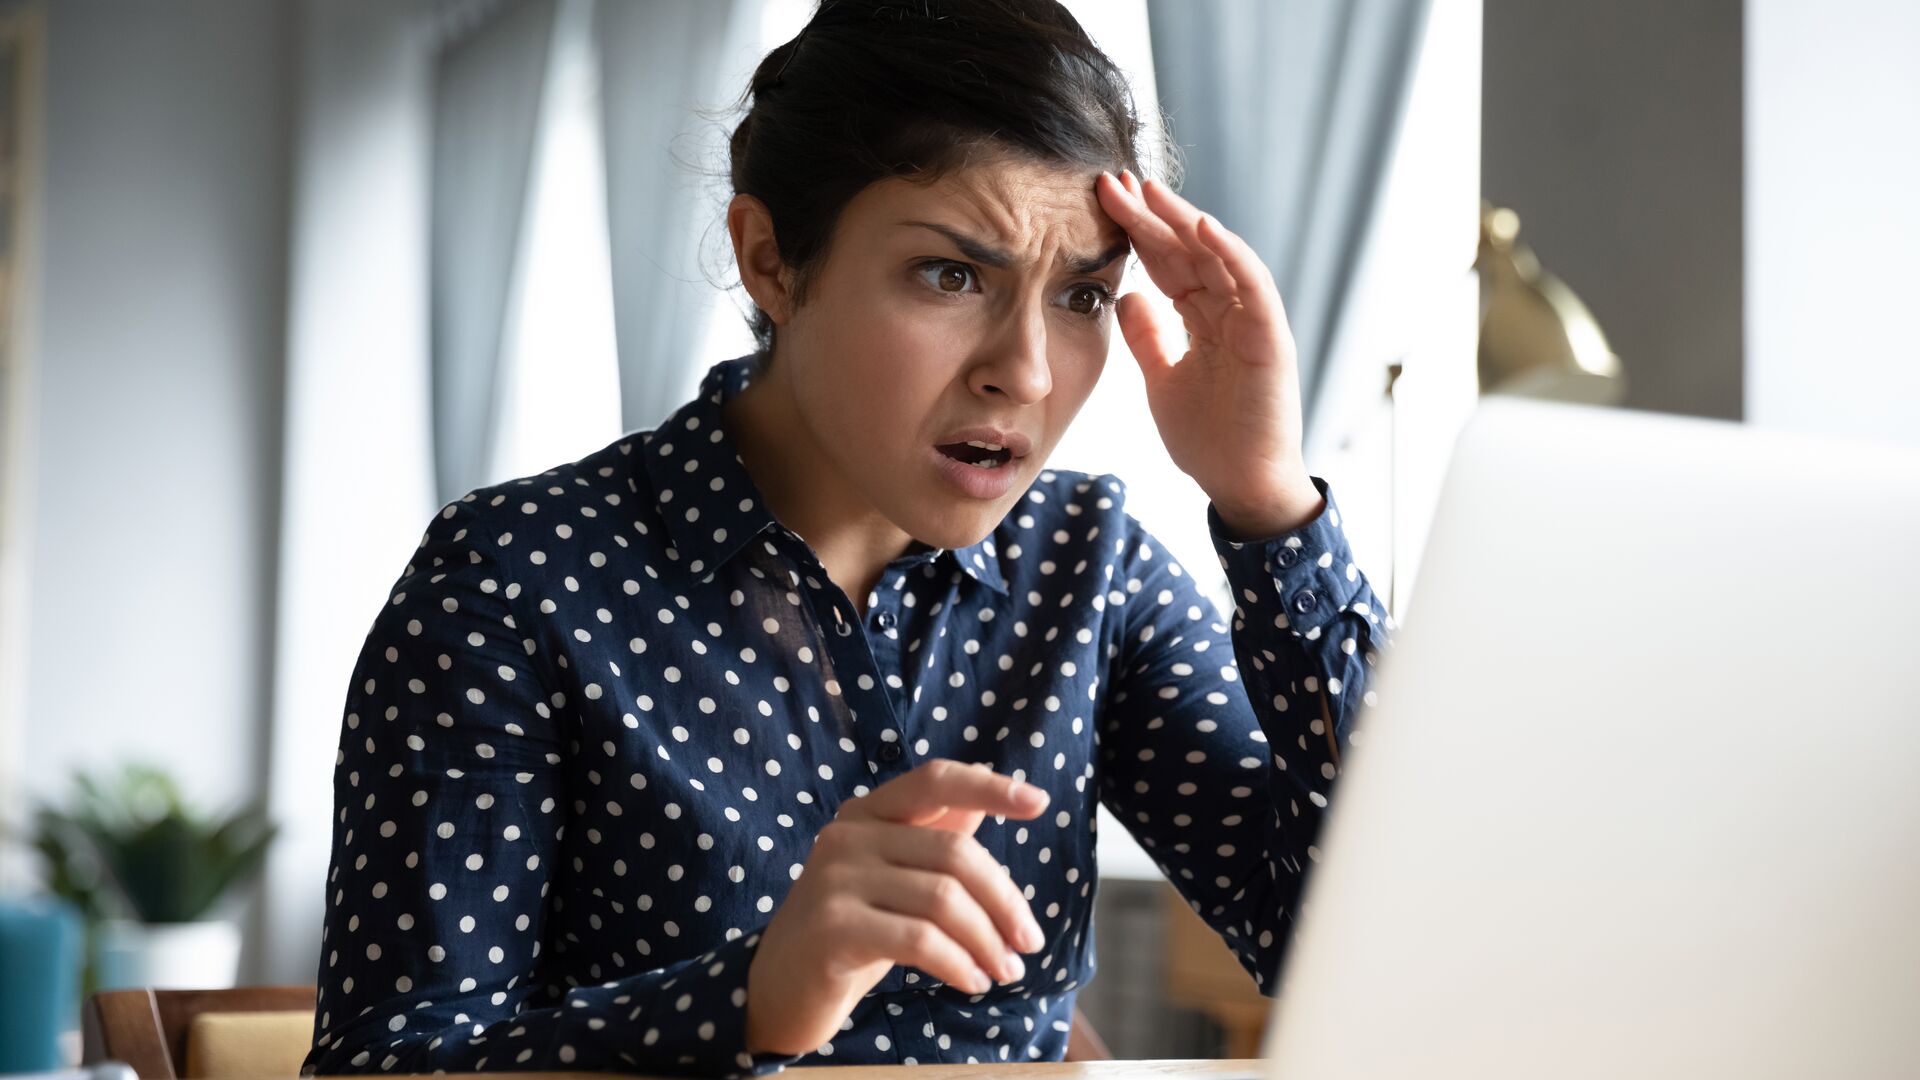 Alarmed and worried woman looking at a laptop computer screen